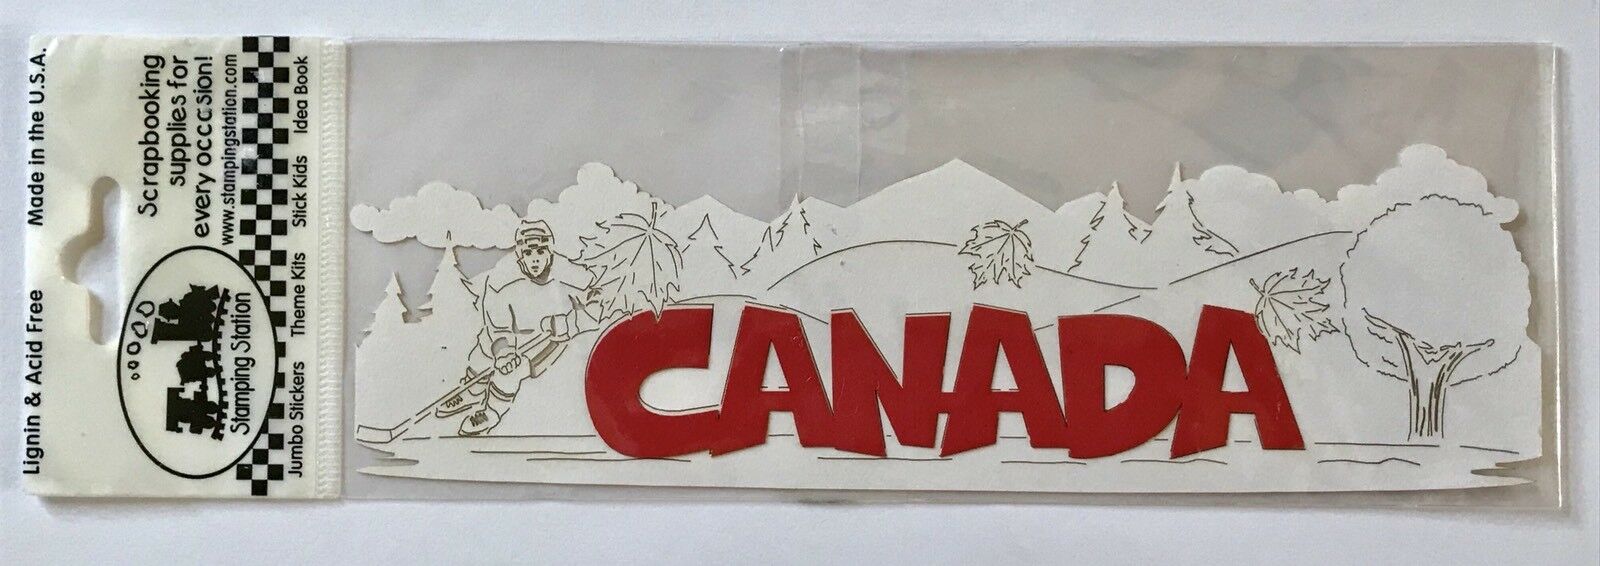 NIP CANADA 8 INCH STAMPING STATION LAYERED LASER DIECUT HOCKEY MAPLES